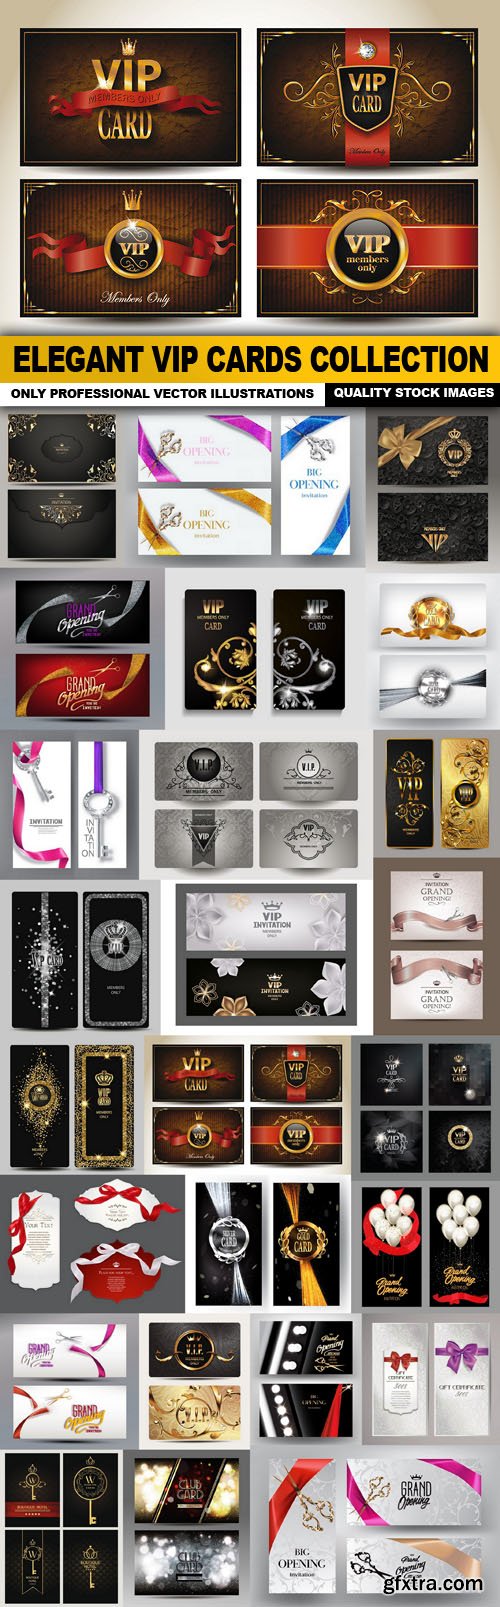 Elegant VIP Cards Collection - 25 Vector